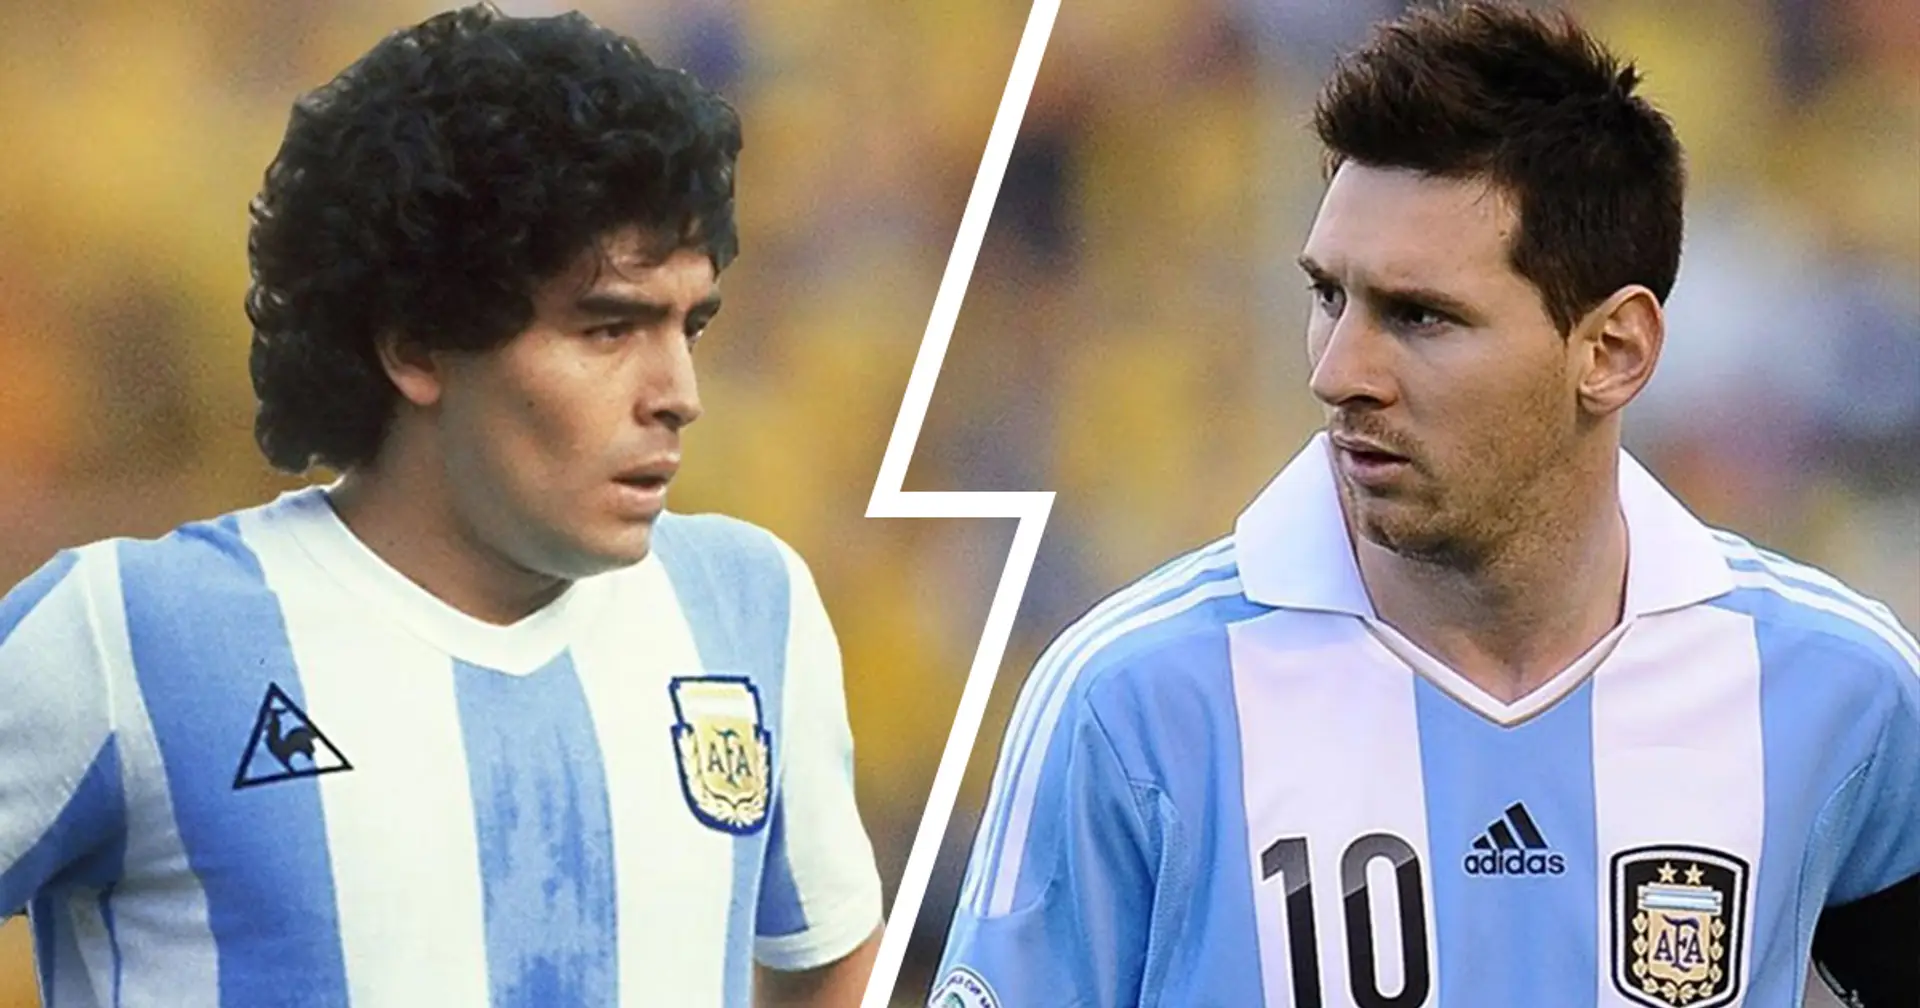 One unique achievement only Messi and Maradona have in common